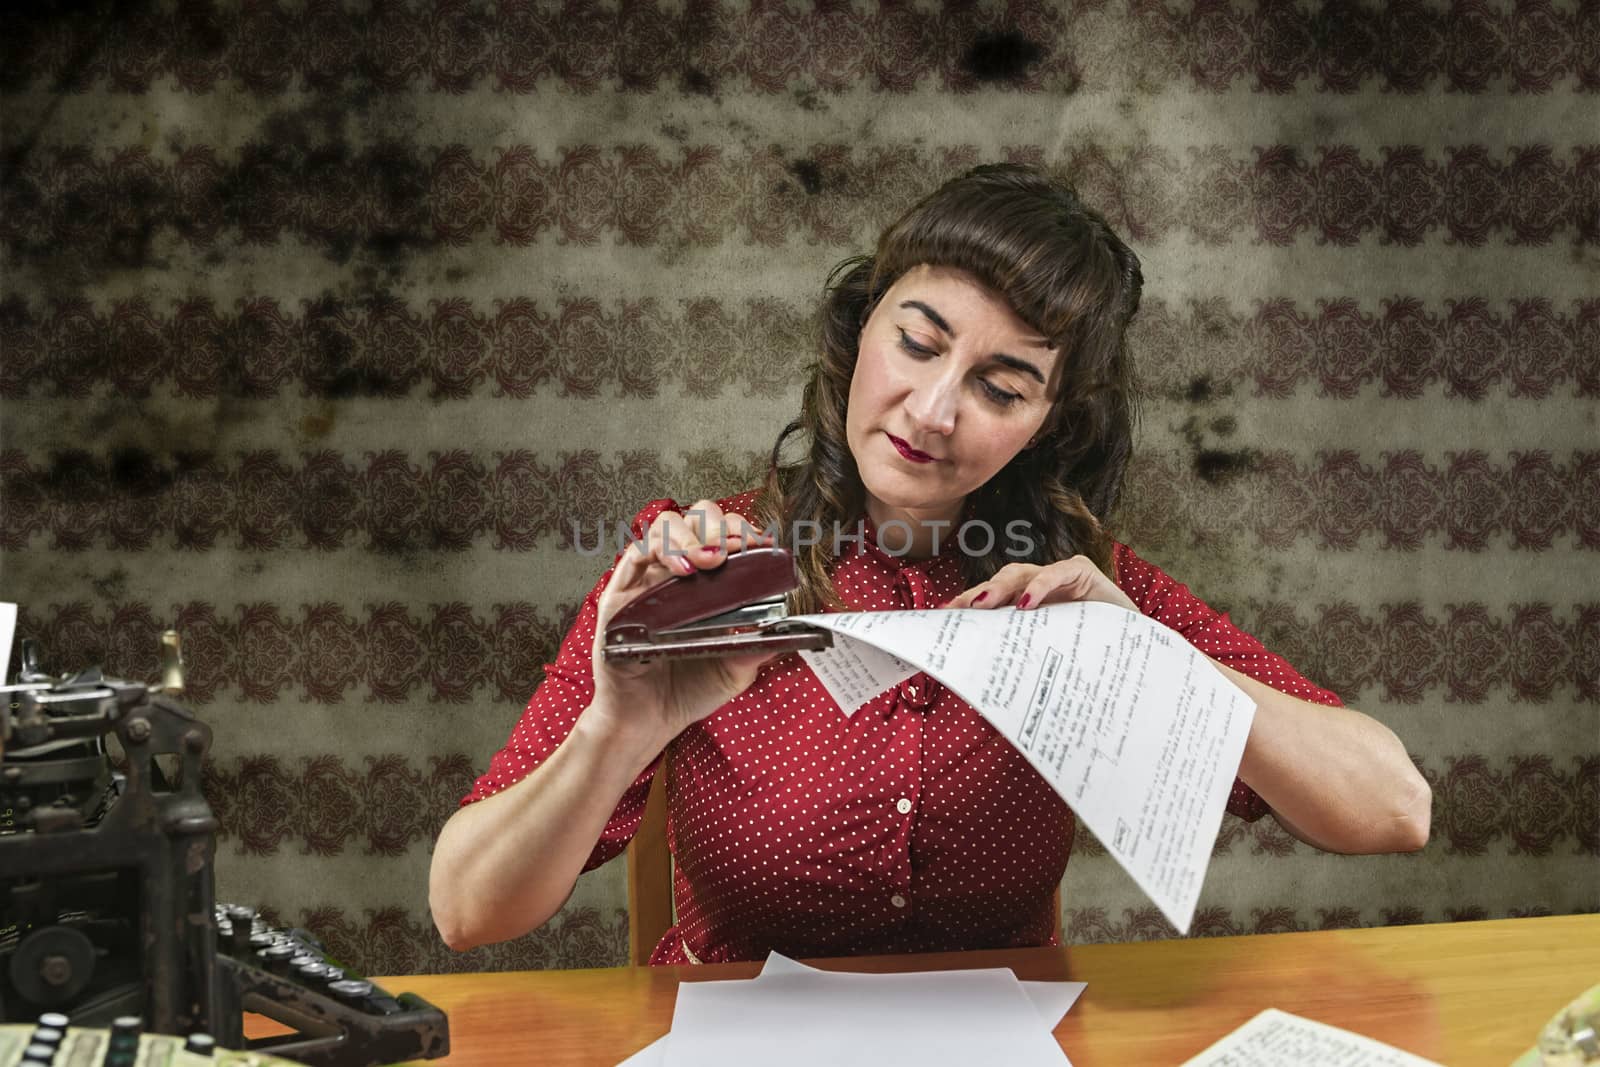 Young woman with red dress stapling papers in office, 1960's